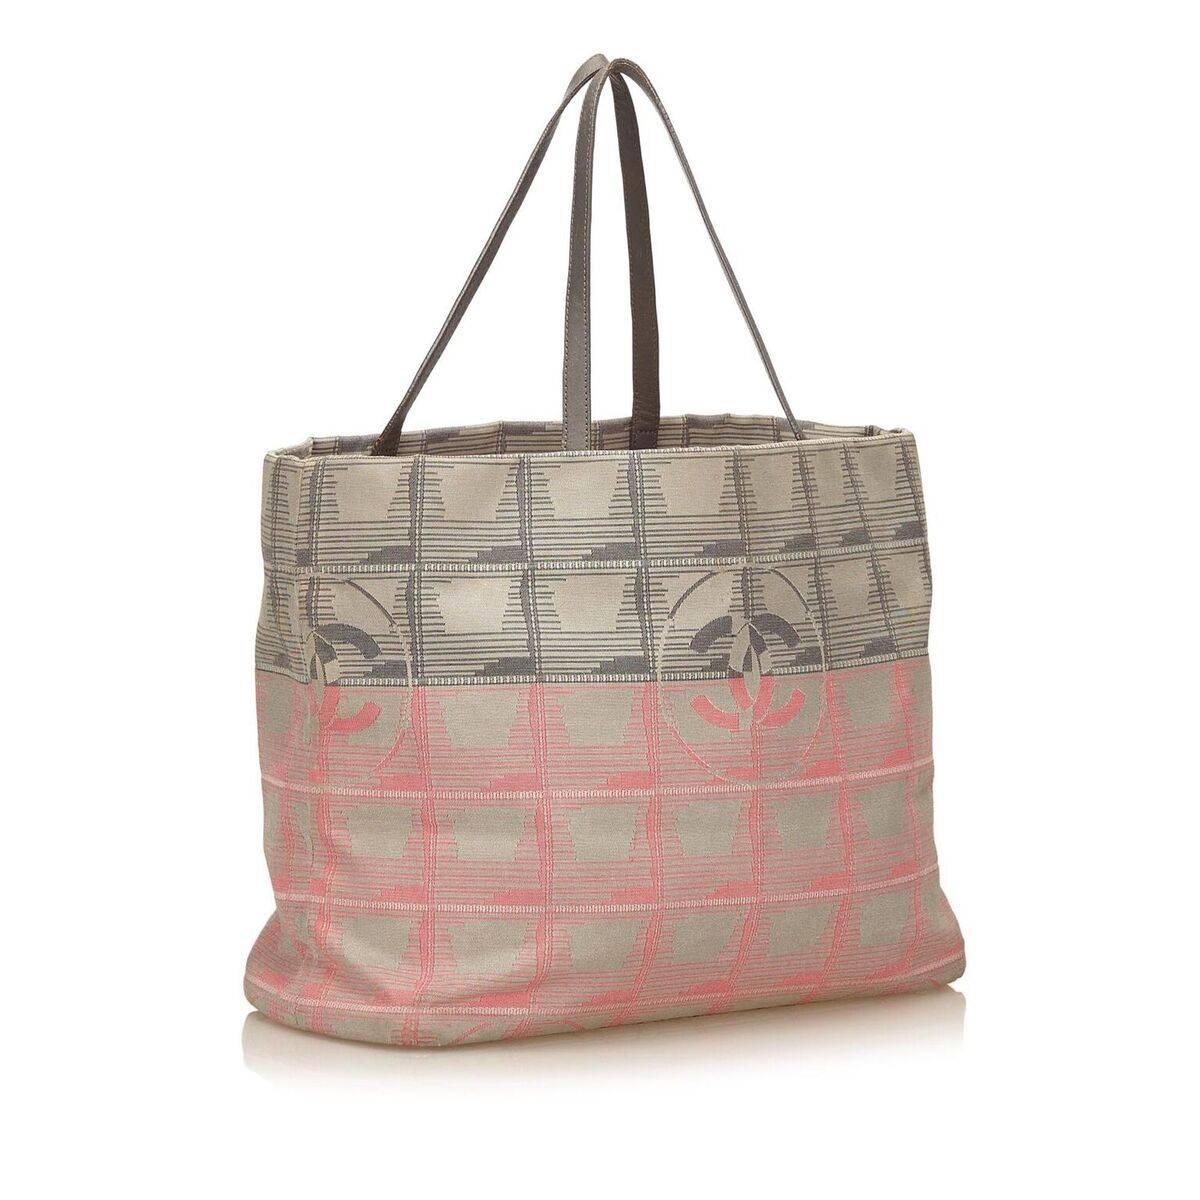 Product details:  Pink and grey jacquard New Travel Line tote bag by Chanel.  Dual shoulder straps.  Open top.  Lined interior with inner zip pocket and attached key fob.  Protective metal feet.  Silvertone hardware.  11